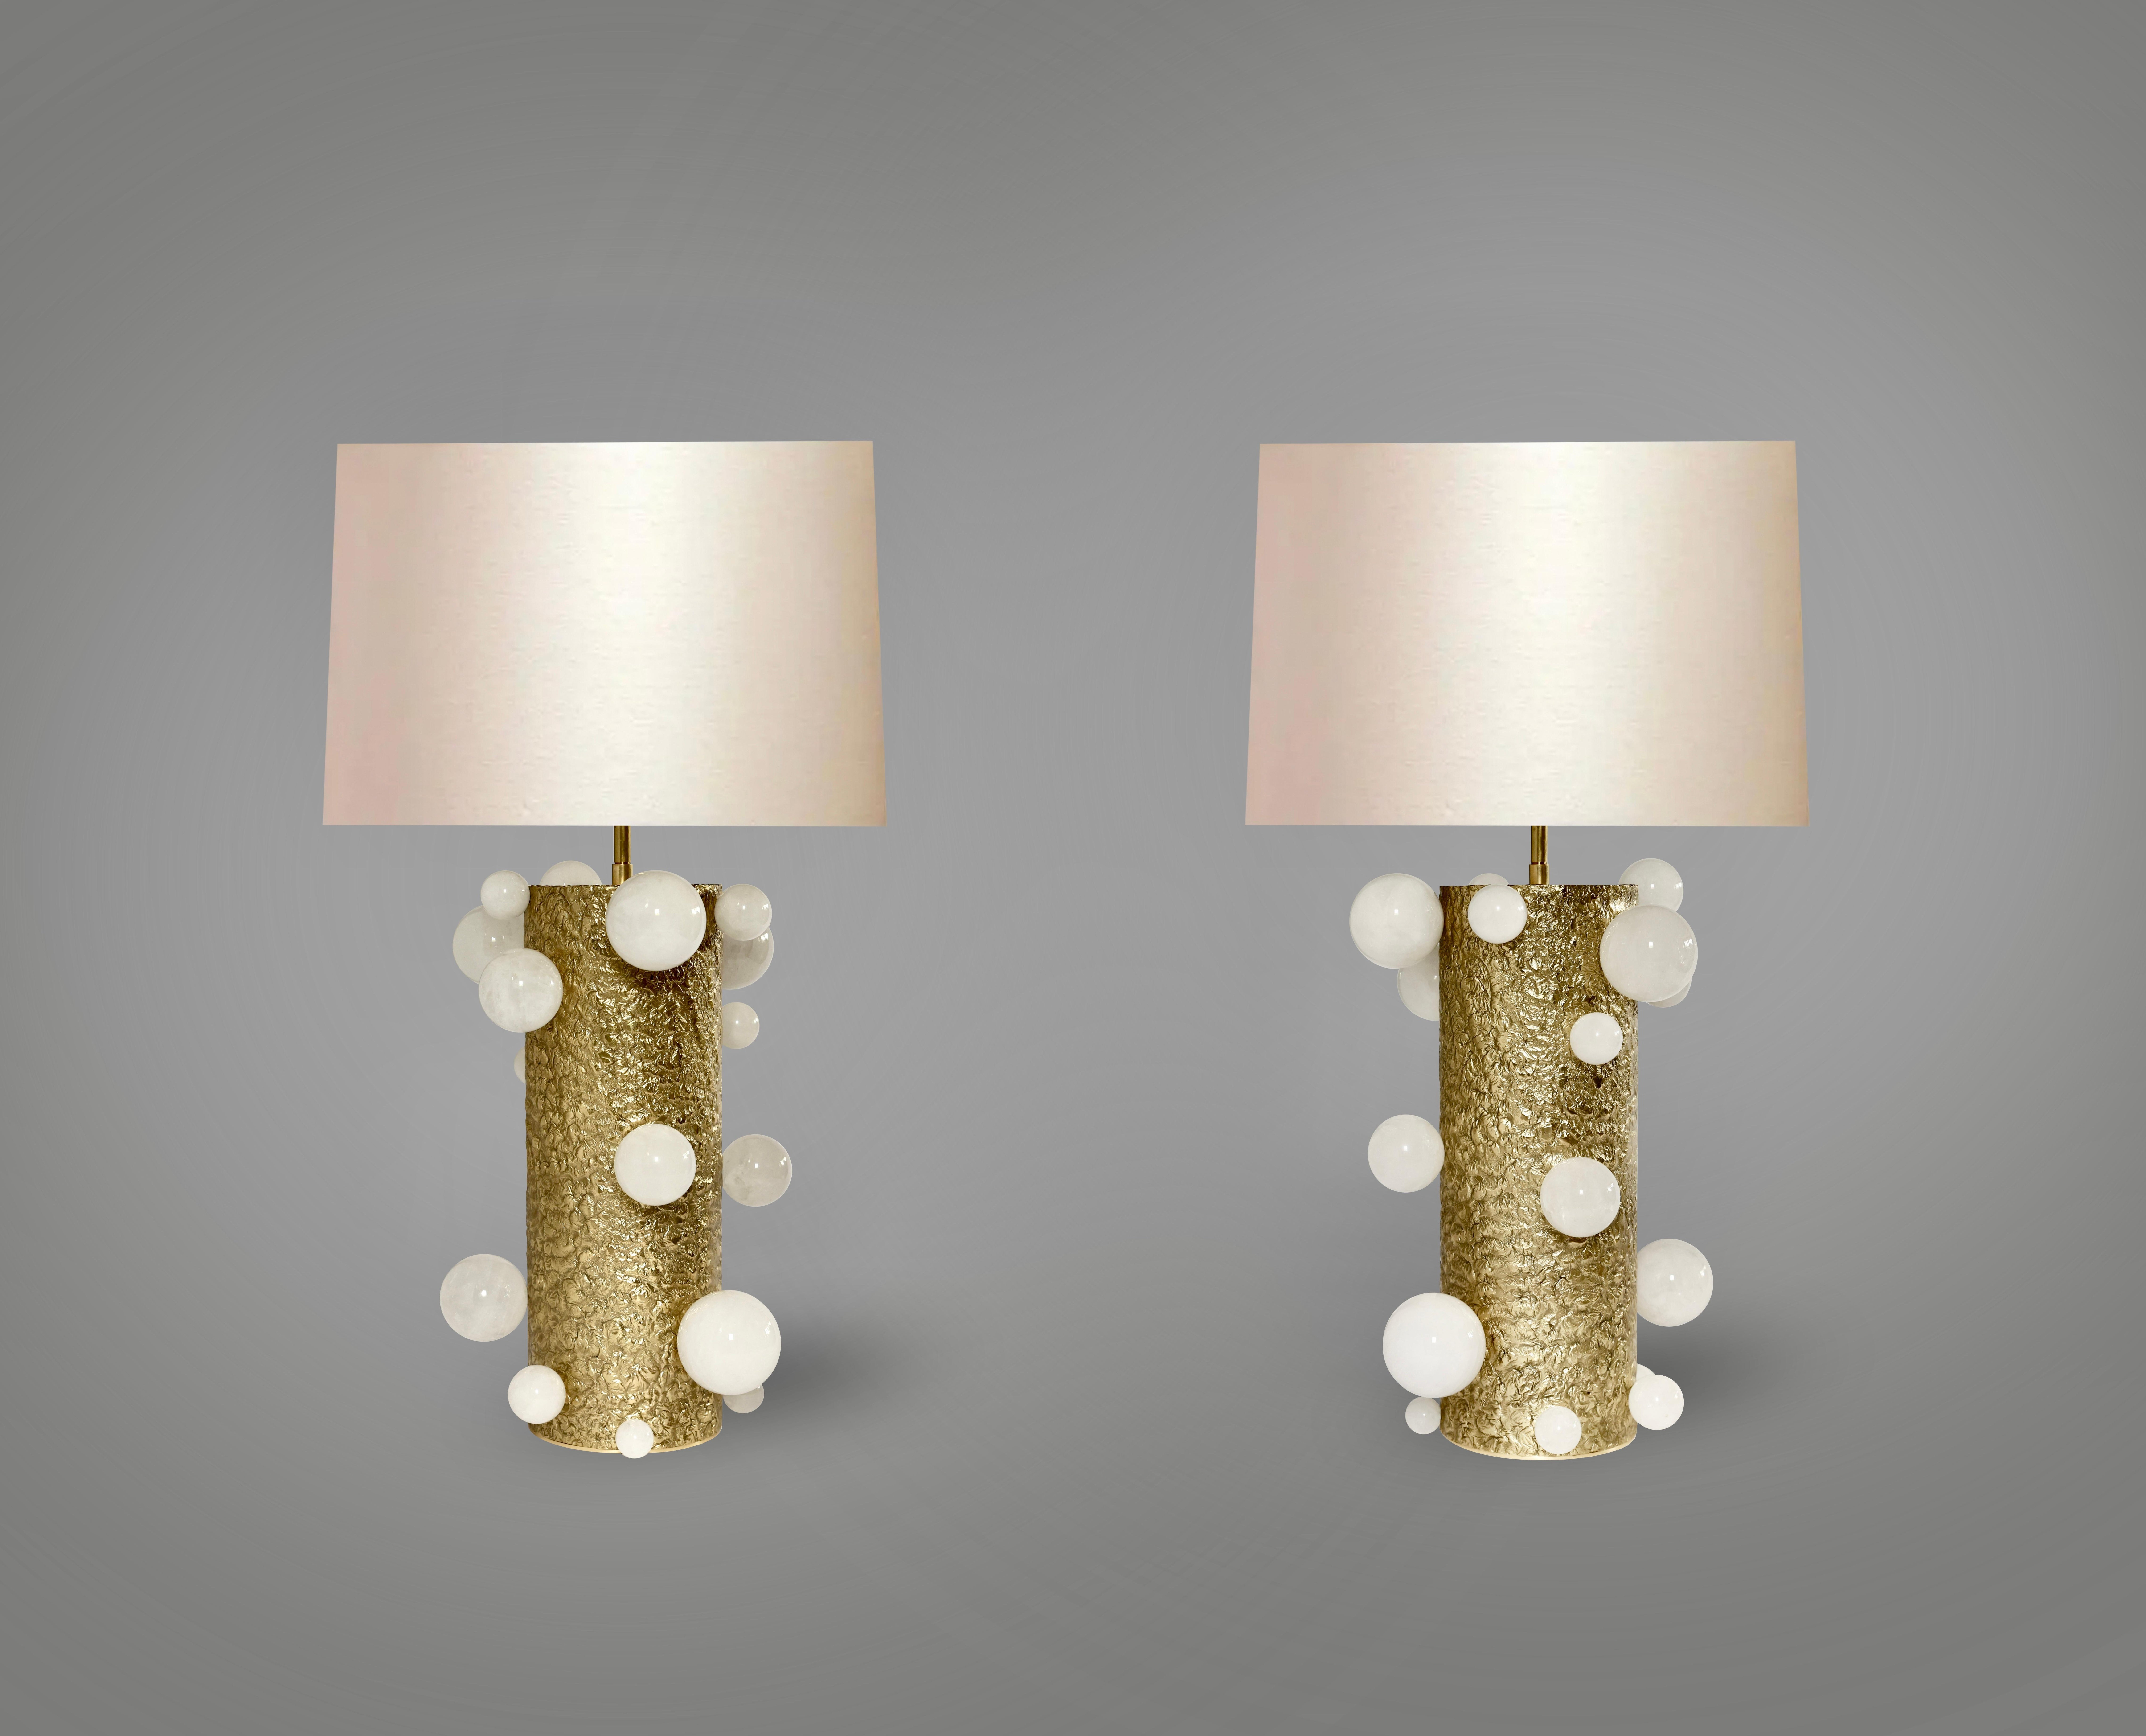 White rock crystal bubbles with hammered brass stand.created by Phoenix.
To the top of the rock crystal spheres 18.5 inch
Lamp shades are not included.